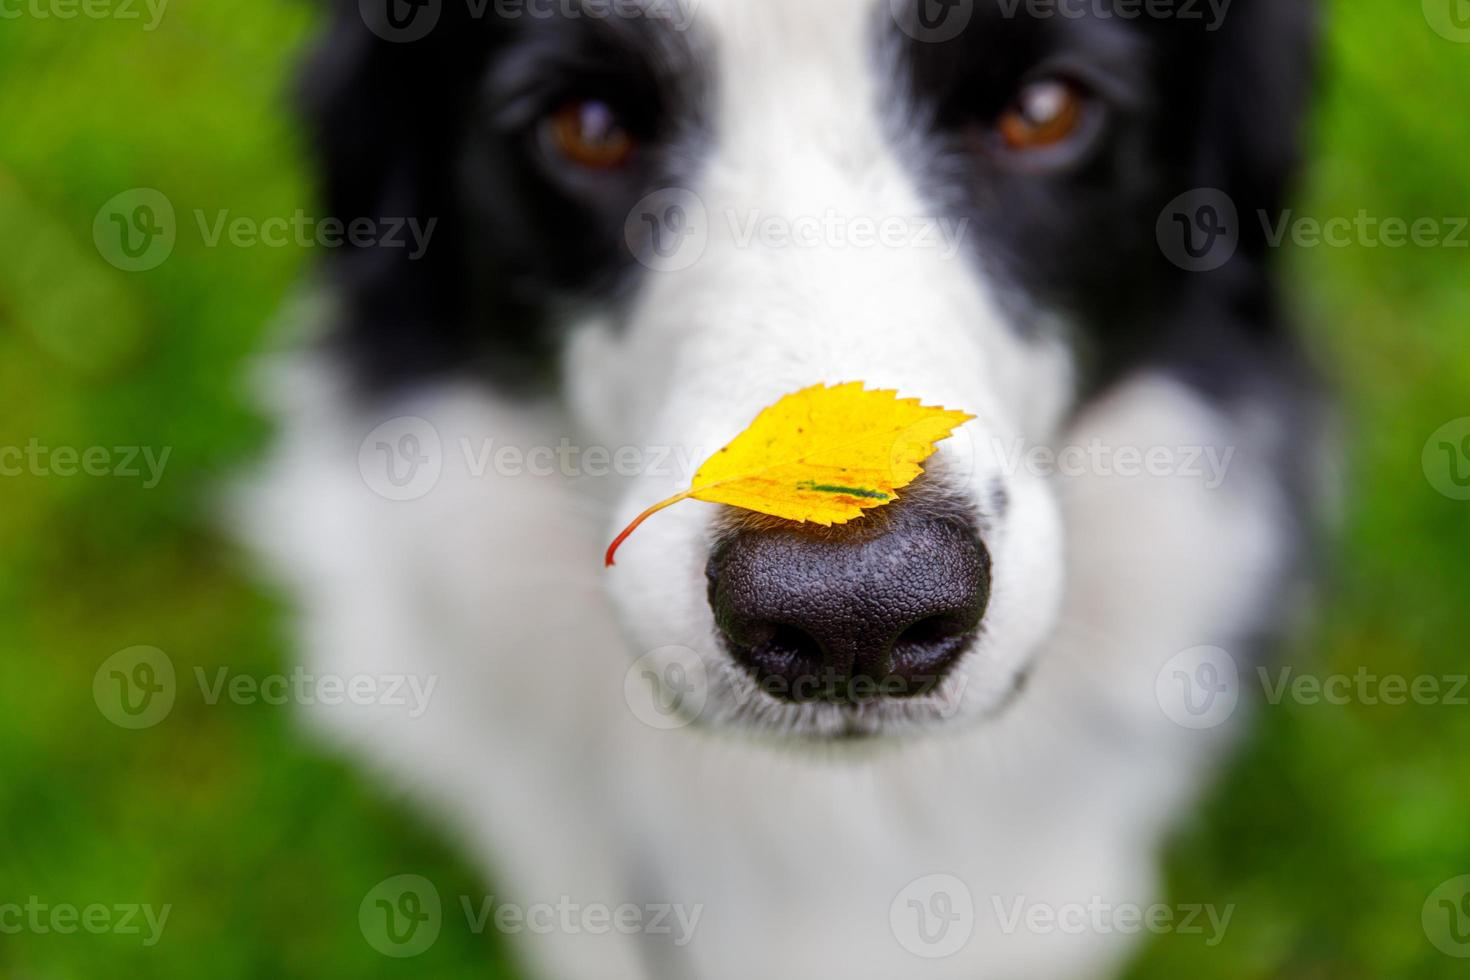 Outdoor portrait of cute funny puppy dog border collie with yellow fall leaf on nose sitting in autumn park. Dog sniffing autumn leaves on walk. Close Up selective focus. Funny pet concept photo